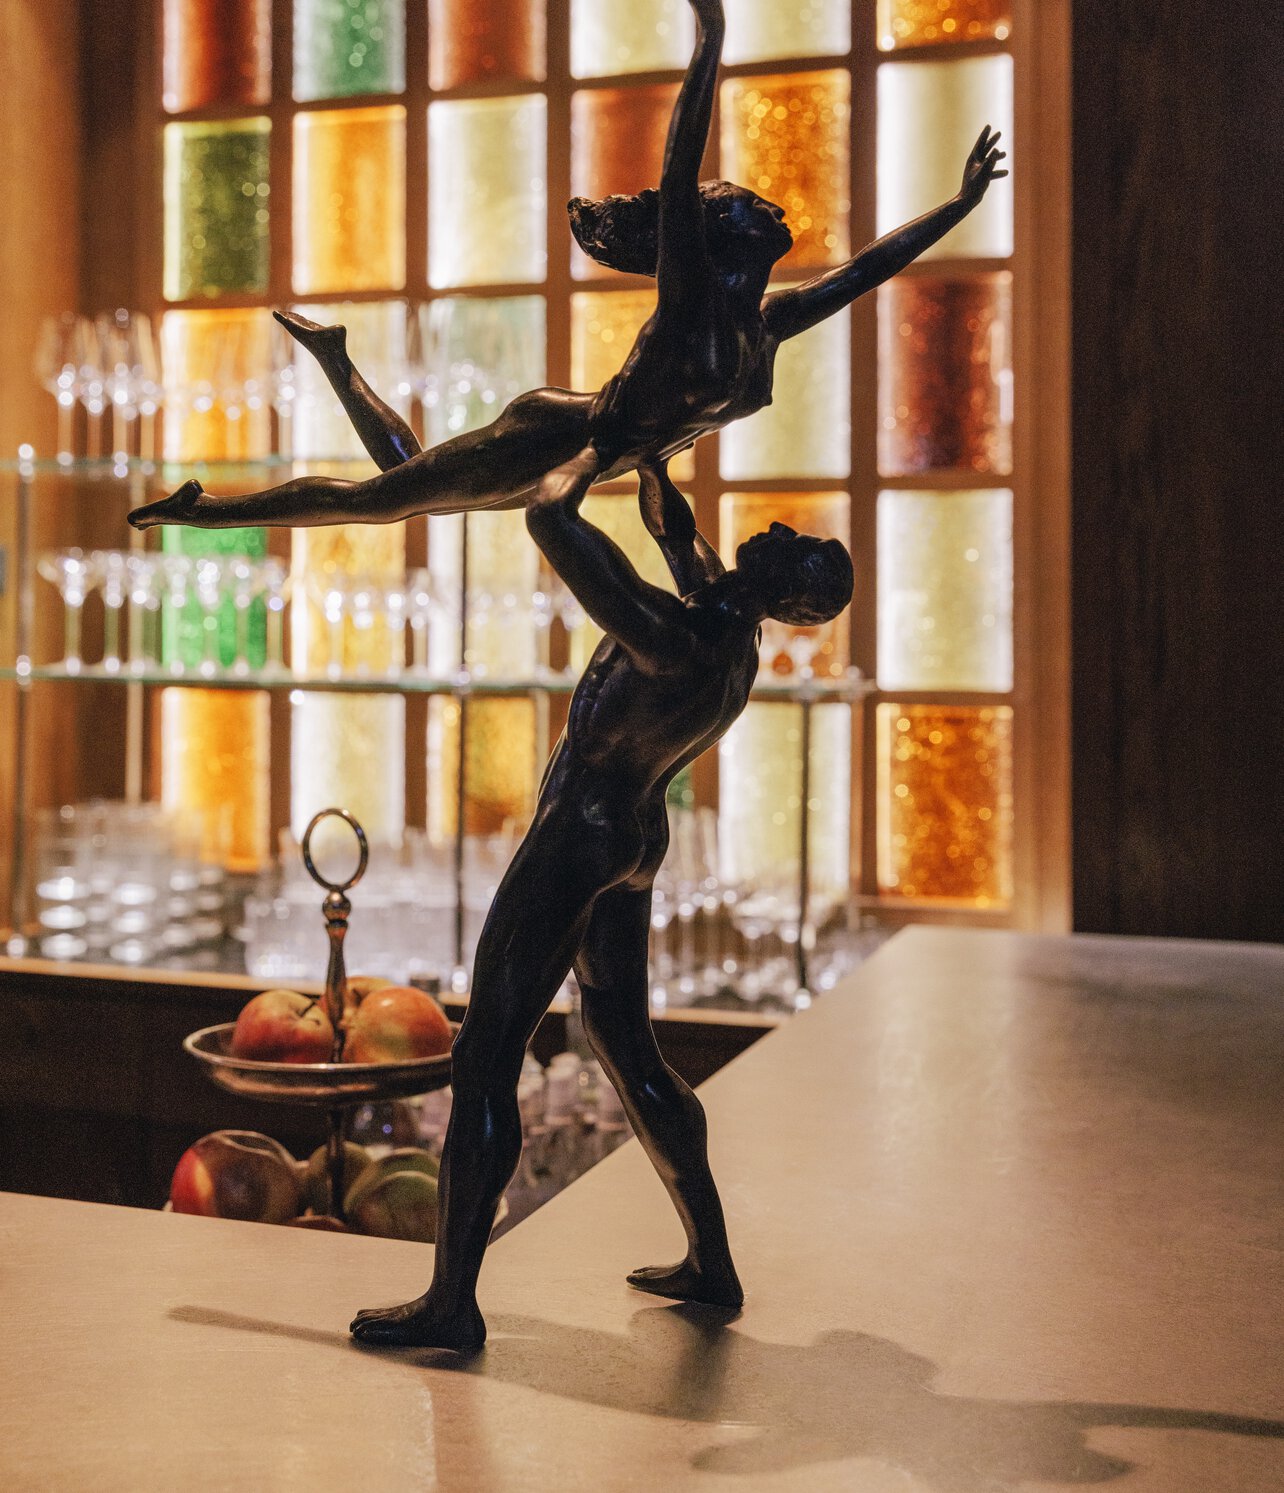 Bronze sculpture of a dancer whirling his dance partner into the air for a lifting figure, on display at the Château Royal event location in Berlin Mitte